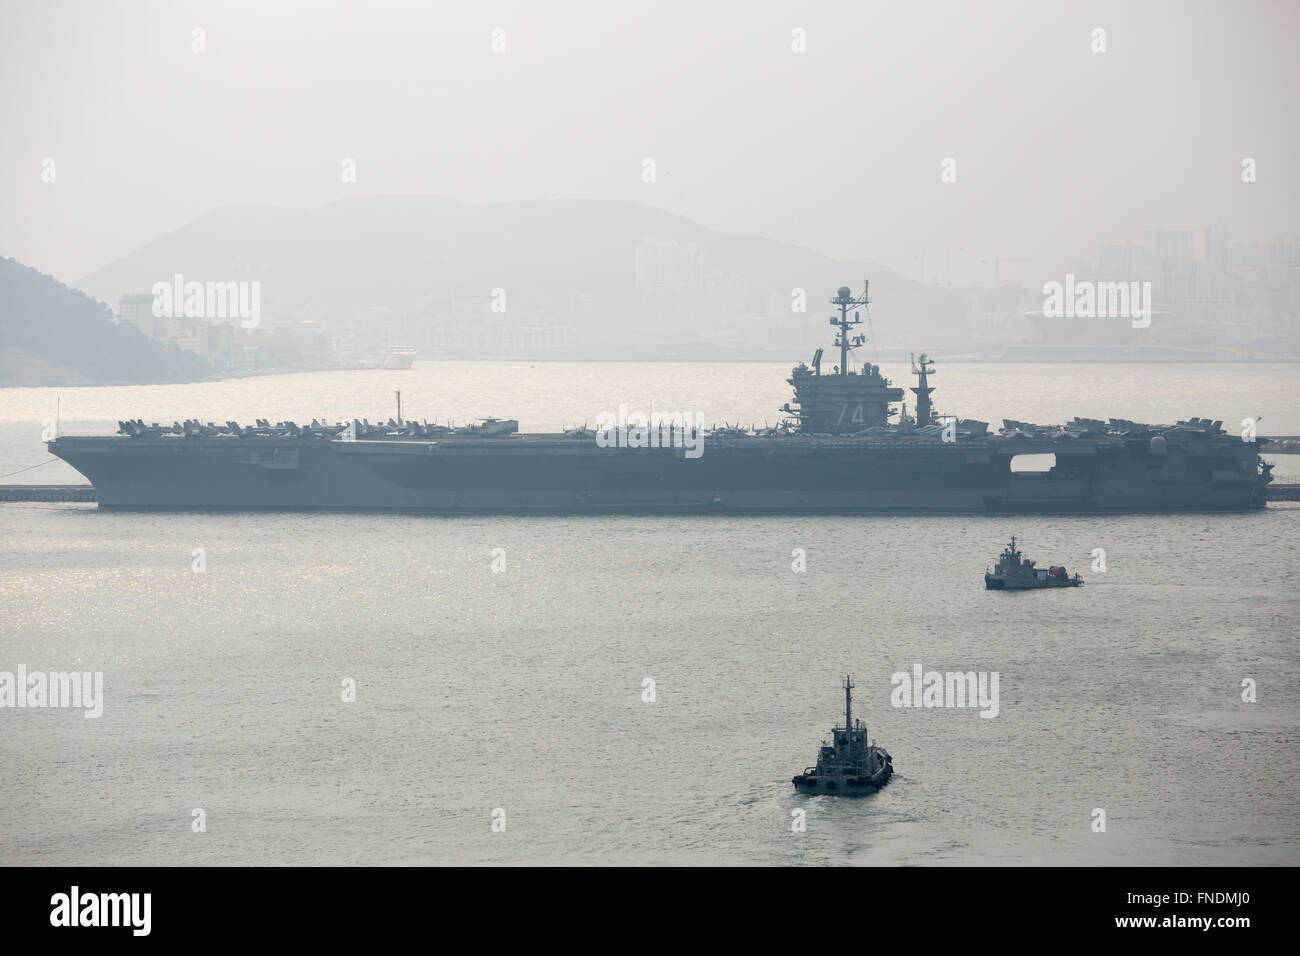 The USS John C. Stennis, Mar 14, 2016 : U.S. nuclear-powered supercarrier, the USS John C. Stennis is seen at a South Korean navy port in Busan, about 450 km southeast of Seoul, South Korea. The USS John C. Stennis (CVN-74) arrived in South Korea on March 13, 2016 to participate in the Key Resolve military drills between South Korea and the United States, which is held from March 7-18. The USS John C. Stennis is the U.S. Navy's seventh Nimitz-class supercarrier, loaded with marine and navy aircraft including the F/A-18 Hornet, EA-6B Prowler combat jets and the E-2C Hawkeye early-warning aircra Stock Photo